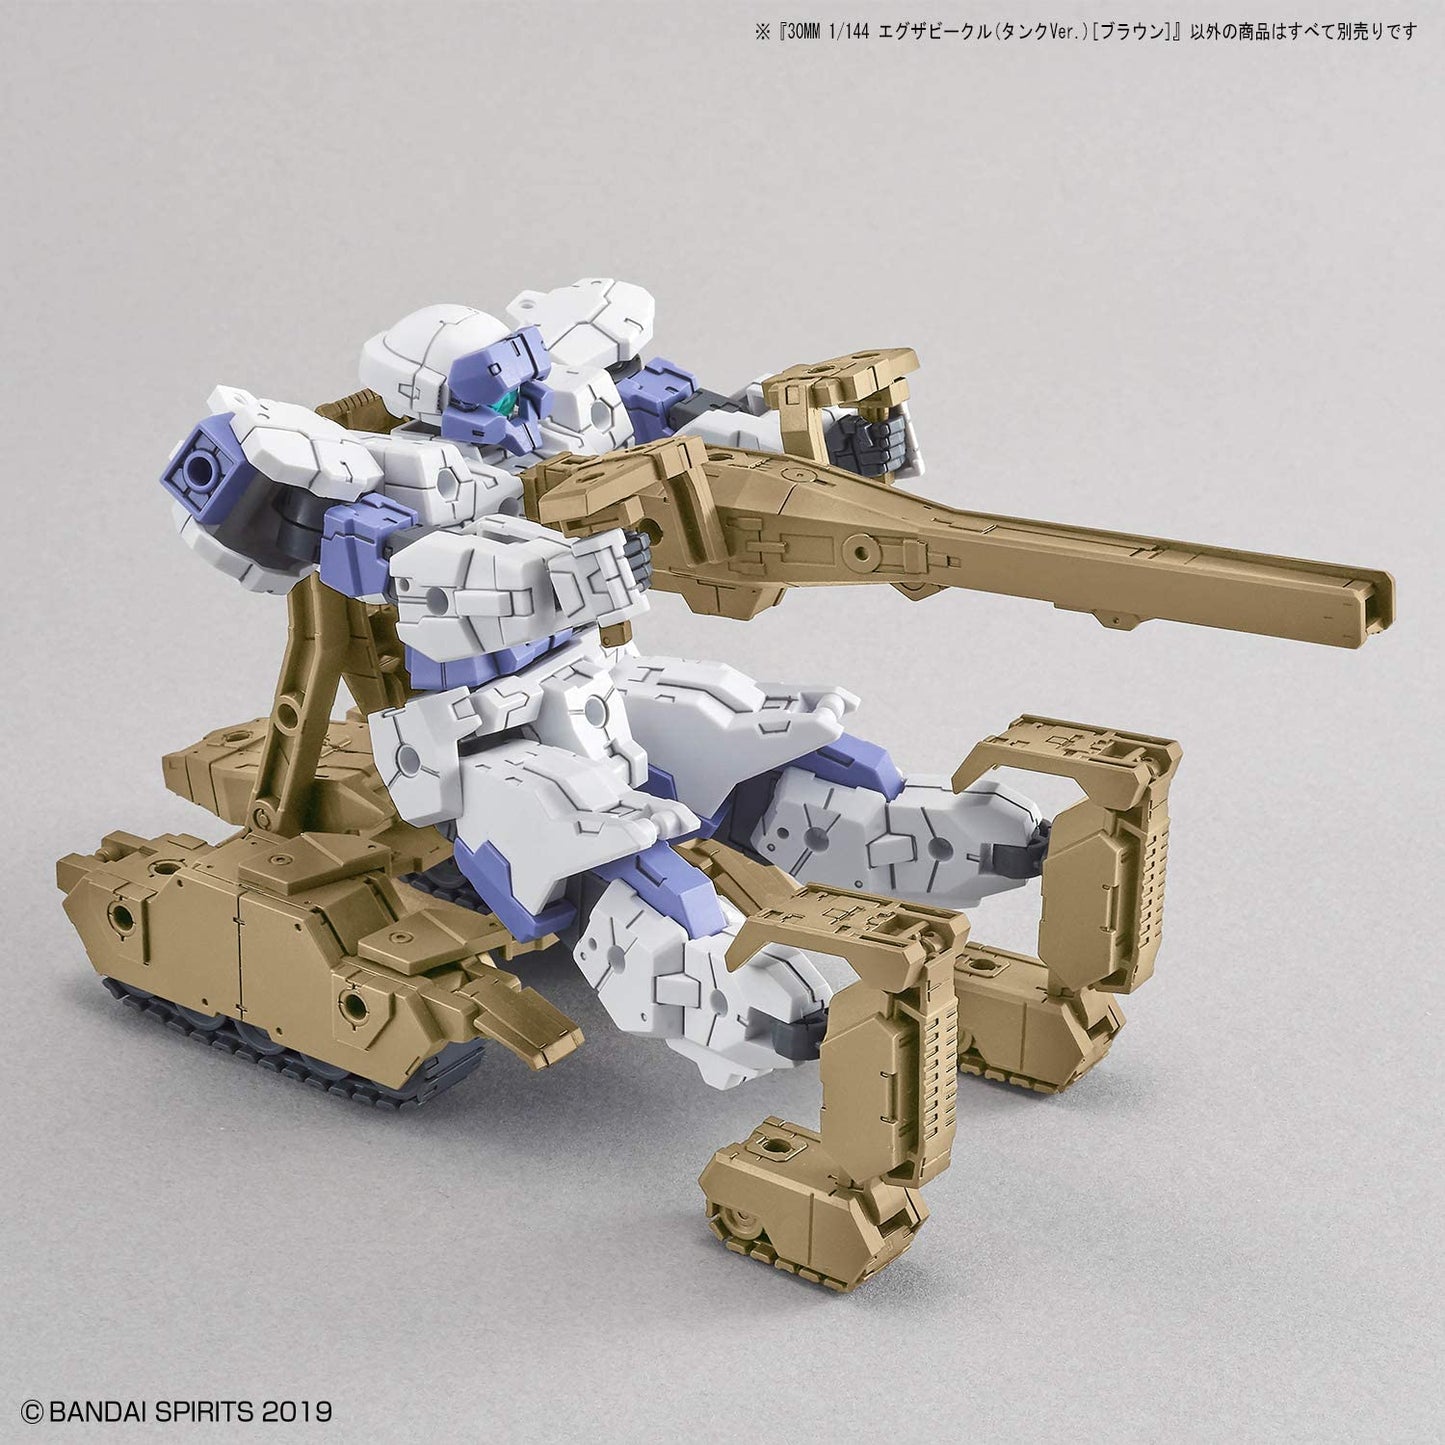 30MM 1/144 Extended Armament Vehicle (TANK Ver.) [BROWN]